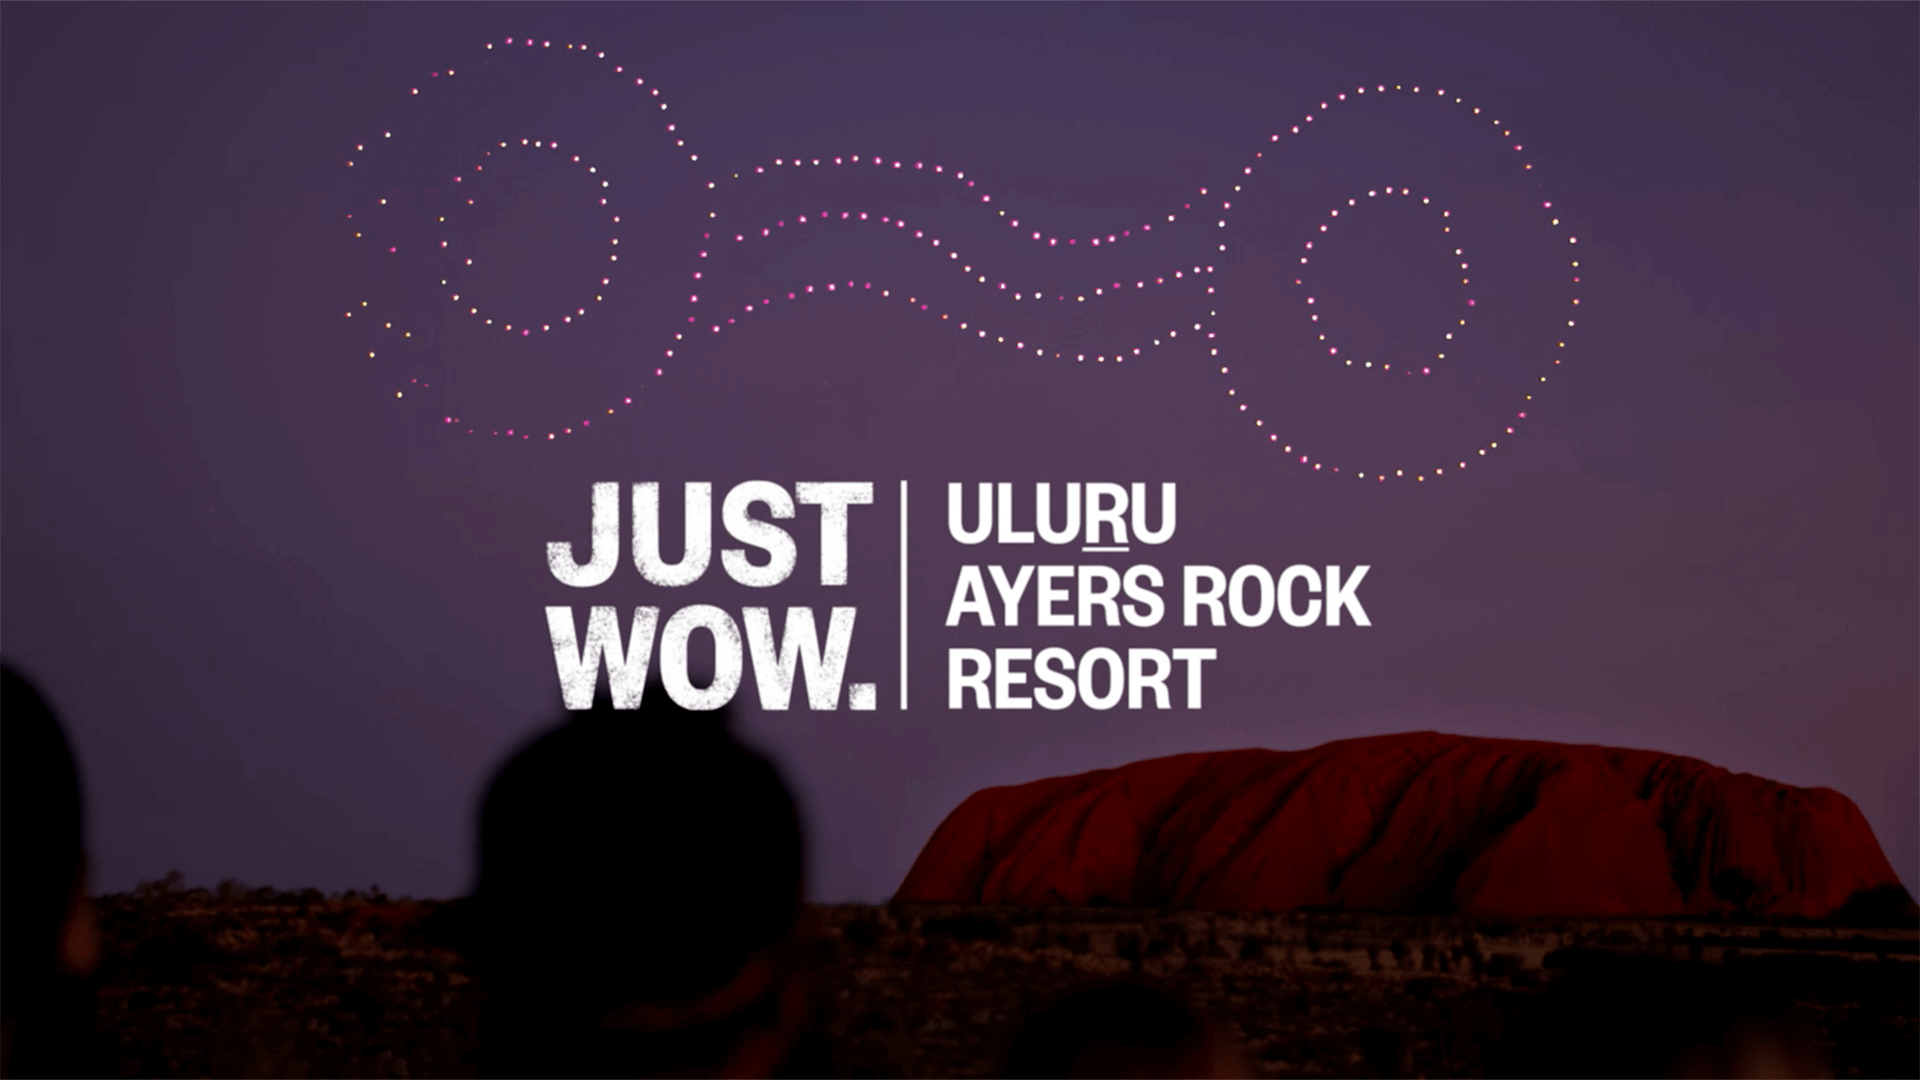 Voyages 'Just Wow' Uluru Ayers Rock Resort campaign featuring a drone light show